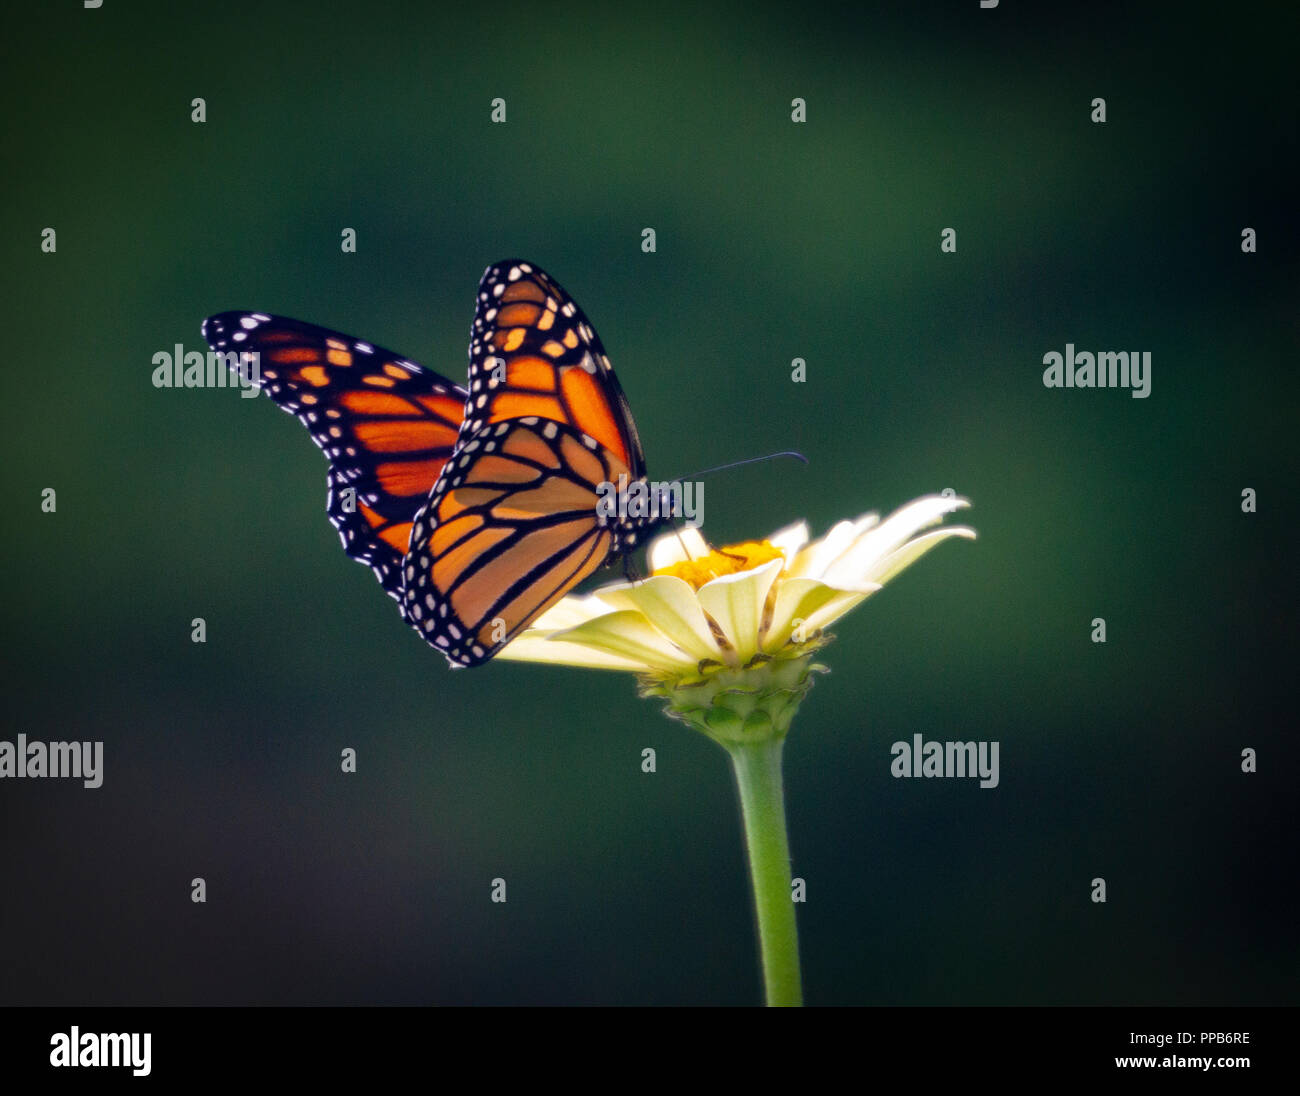 A monarch butterfly visits a zinnia flower in summer Stock Photo